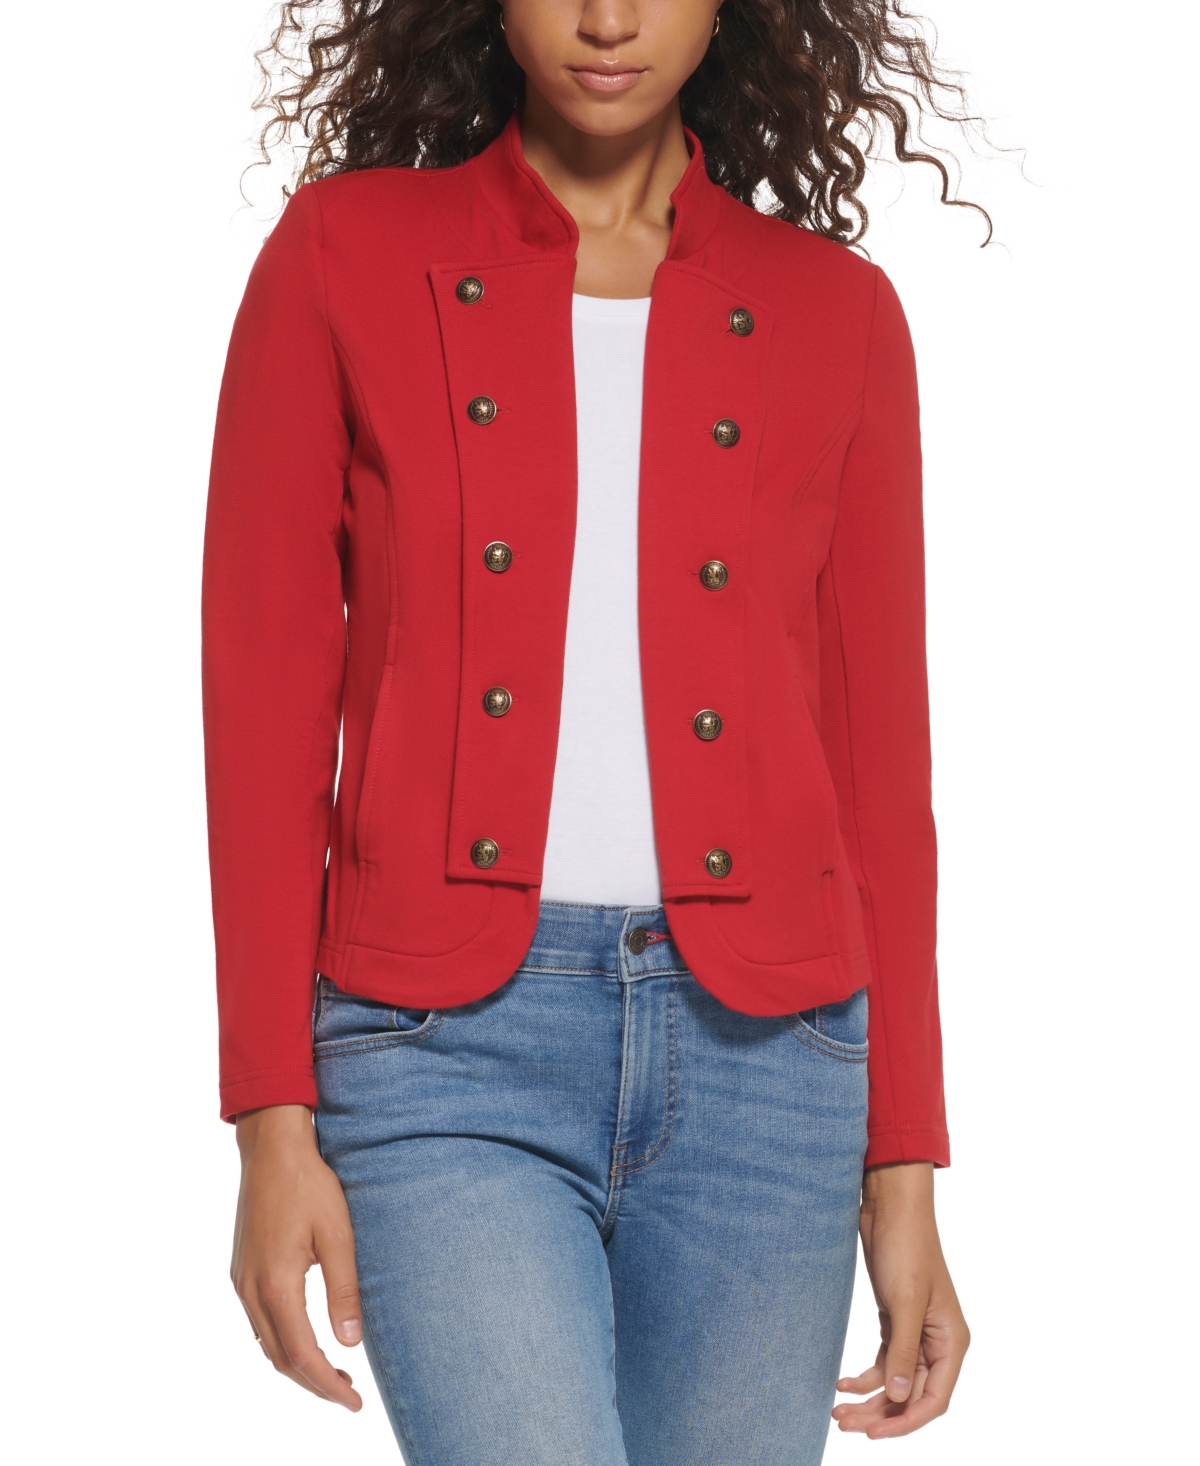 Tommy Hilfiger Plus Military Band Jacket, Chili Pepper, Size 2x